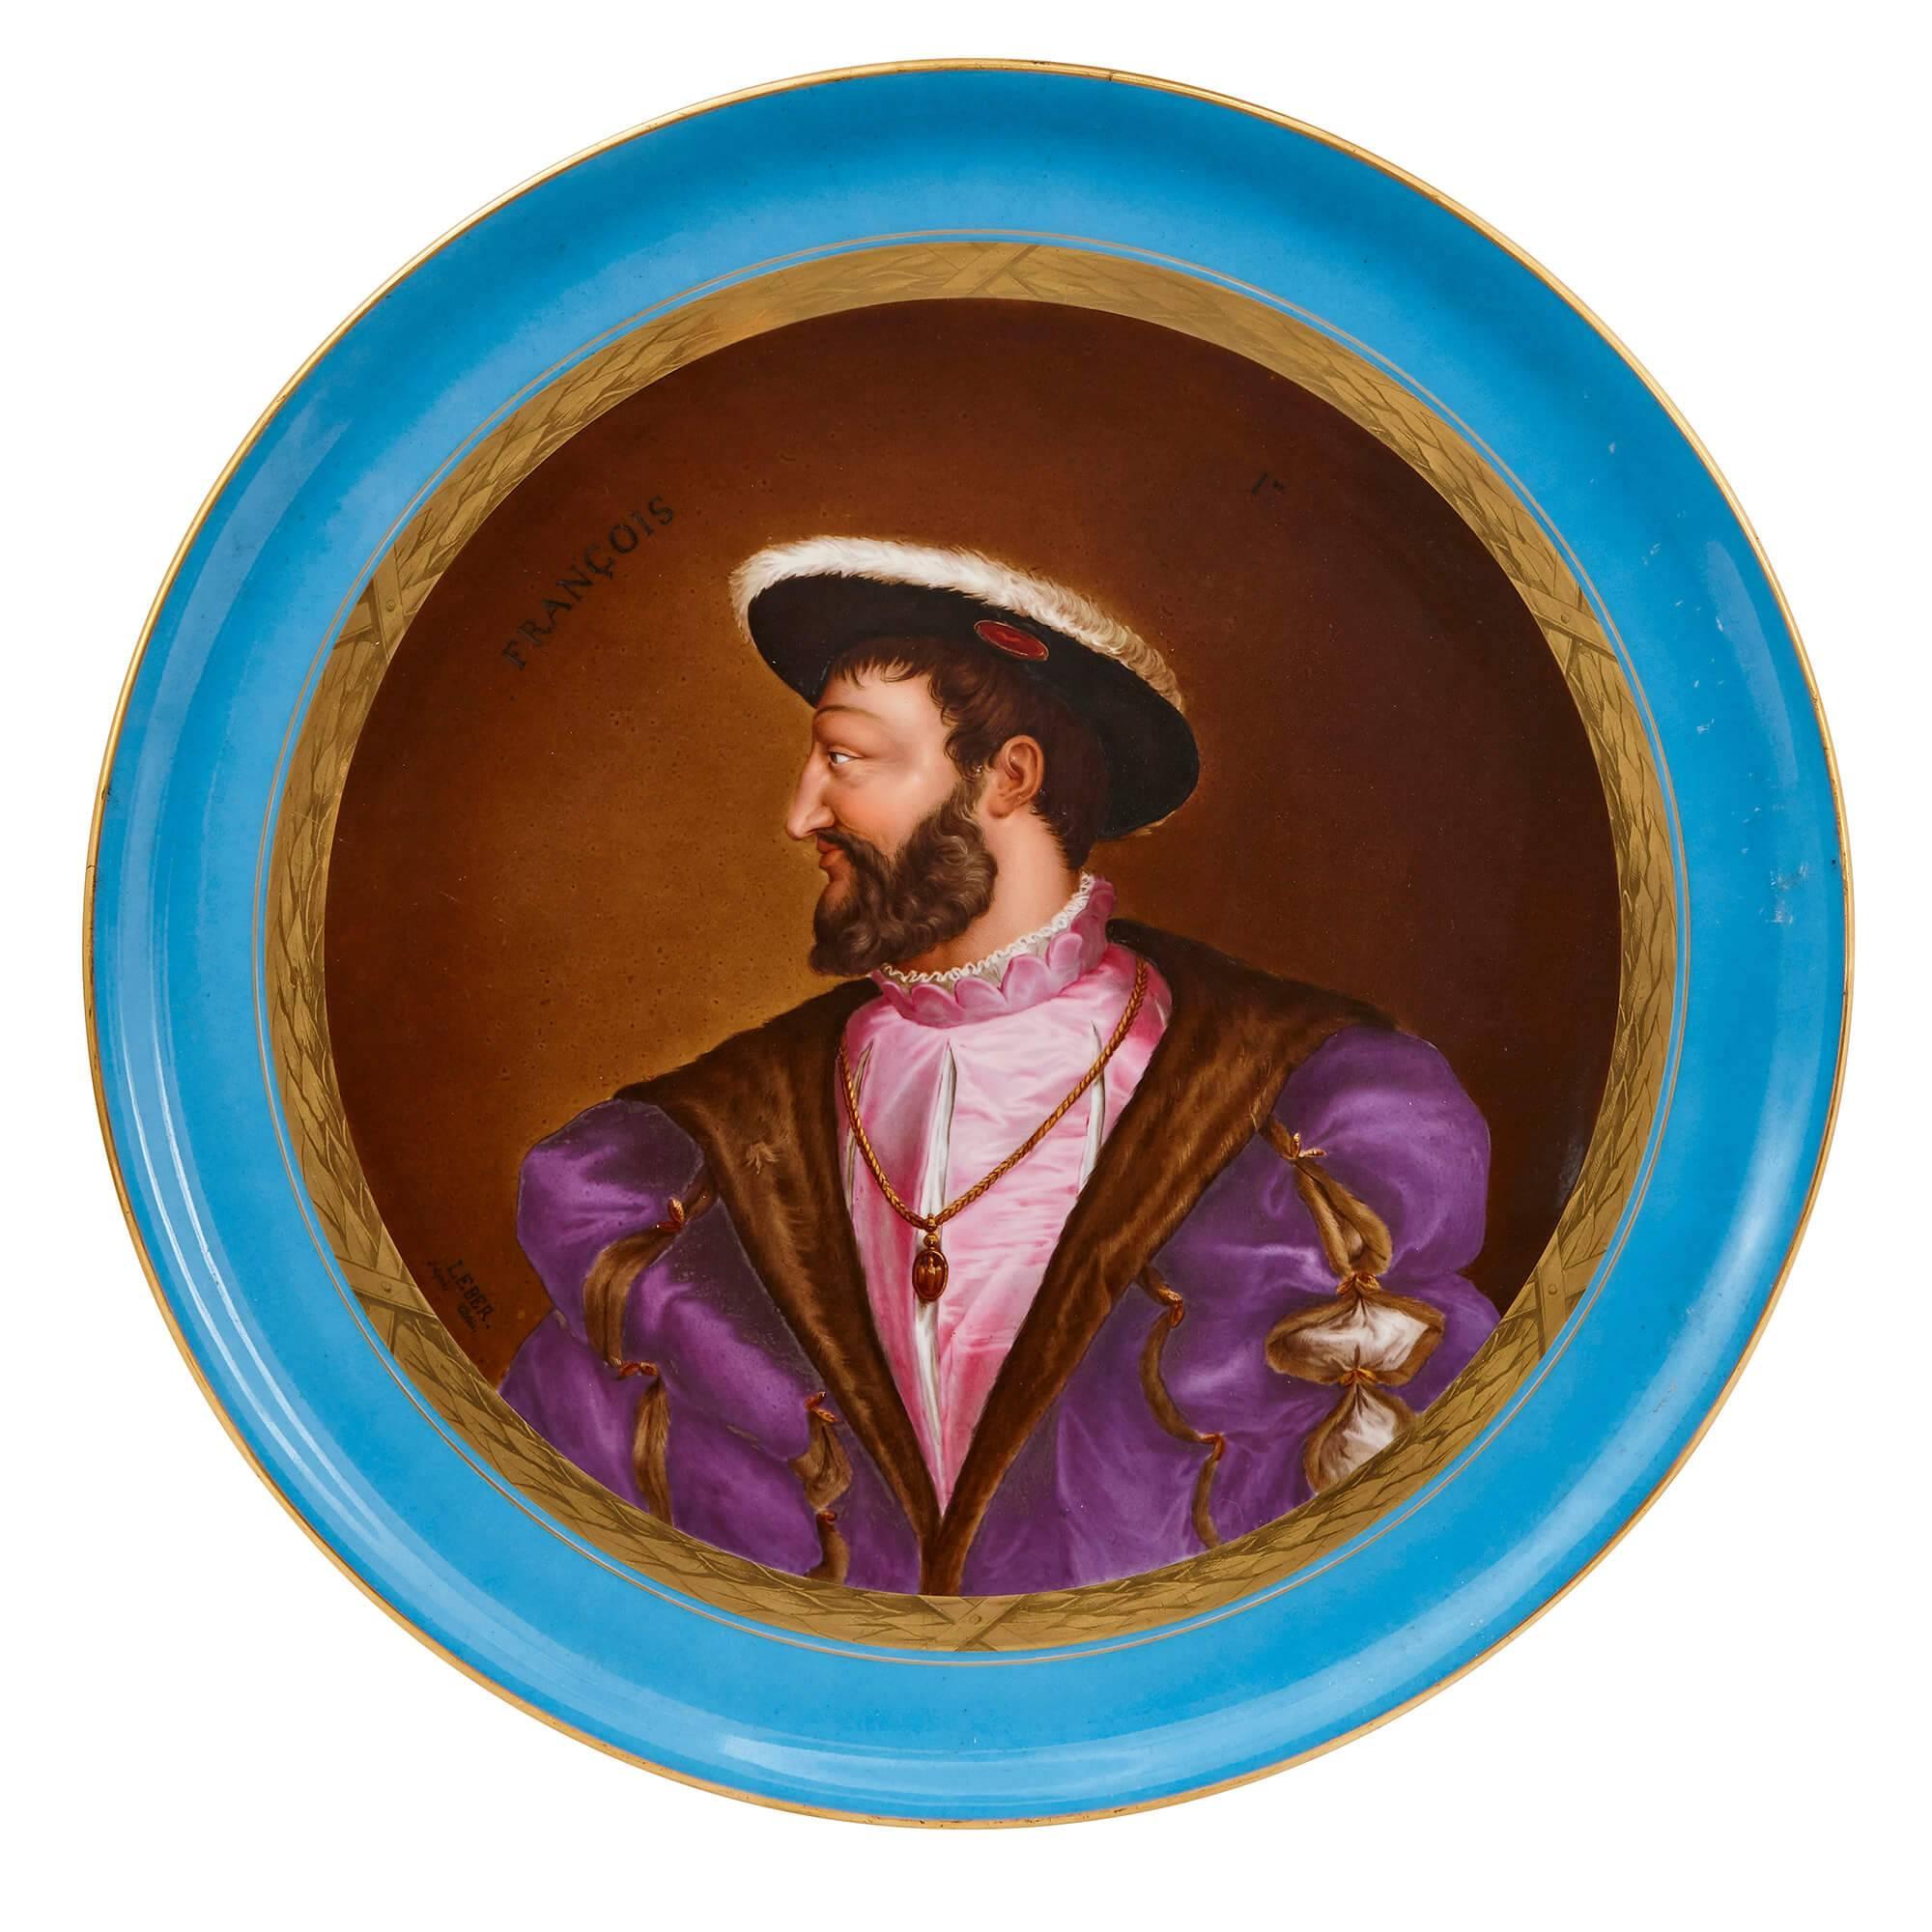 These antique French plates, or chargers, are finely decorated with the portraits of two historic Kings of France: Francois I and Henry II, painted after famous Renaissance works by Titian and Clouet.

The first plate depicts a shoulder-length